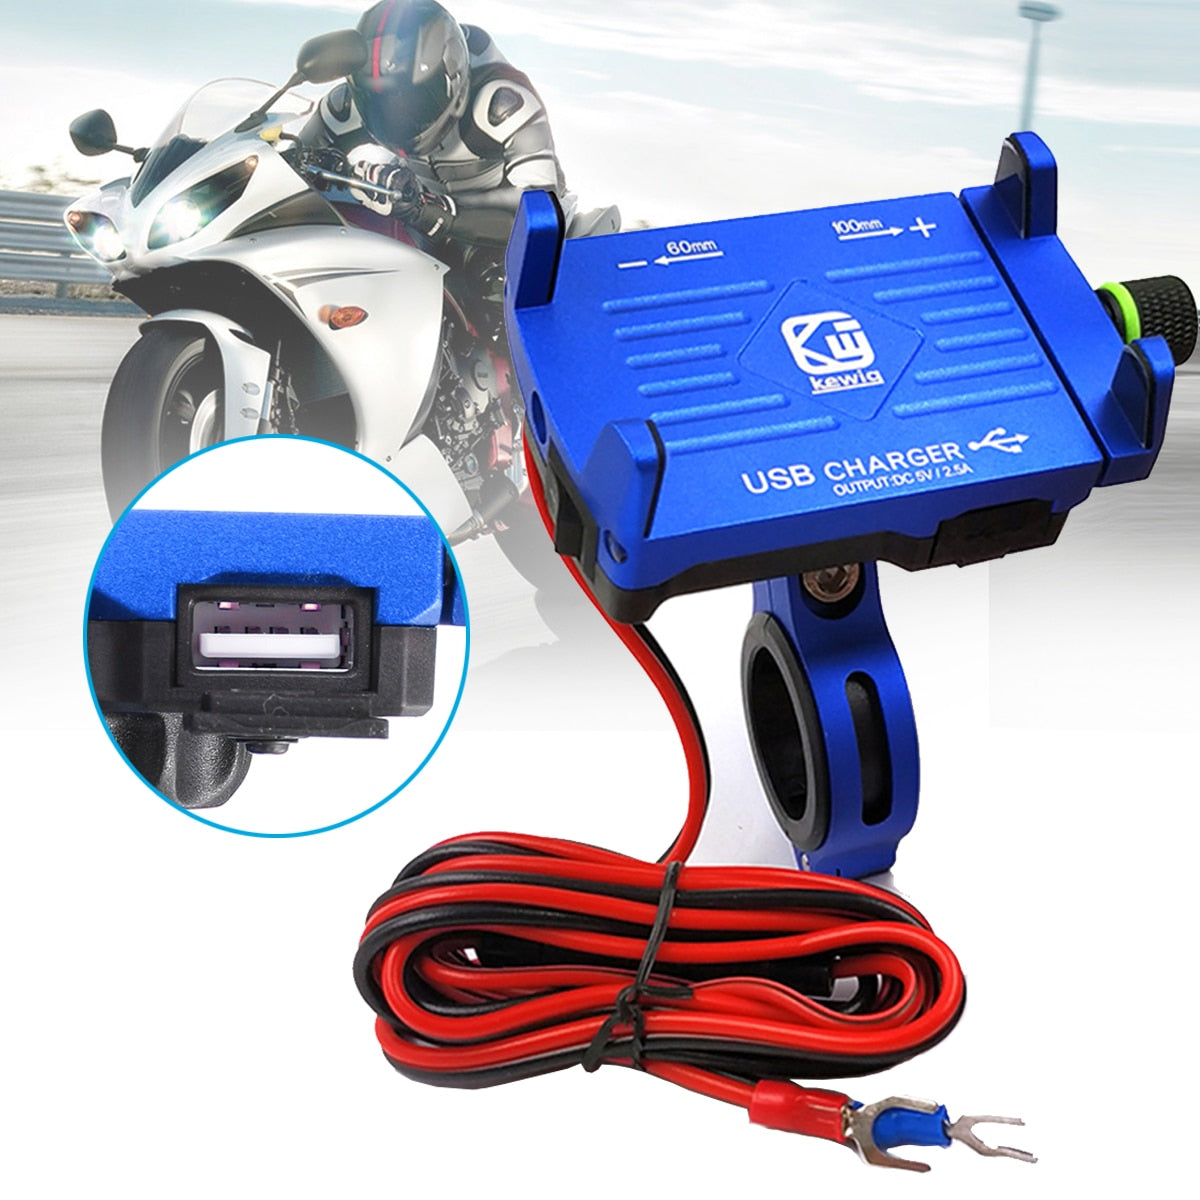 Universal Aluminum Motorcycle Phone Holder USB Charger Cell Bicycle for iPhone X 8 7 Fast Charging - JustgreenBox